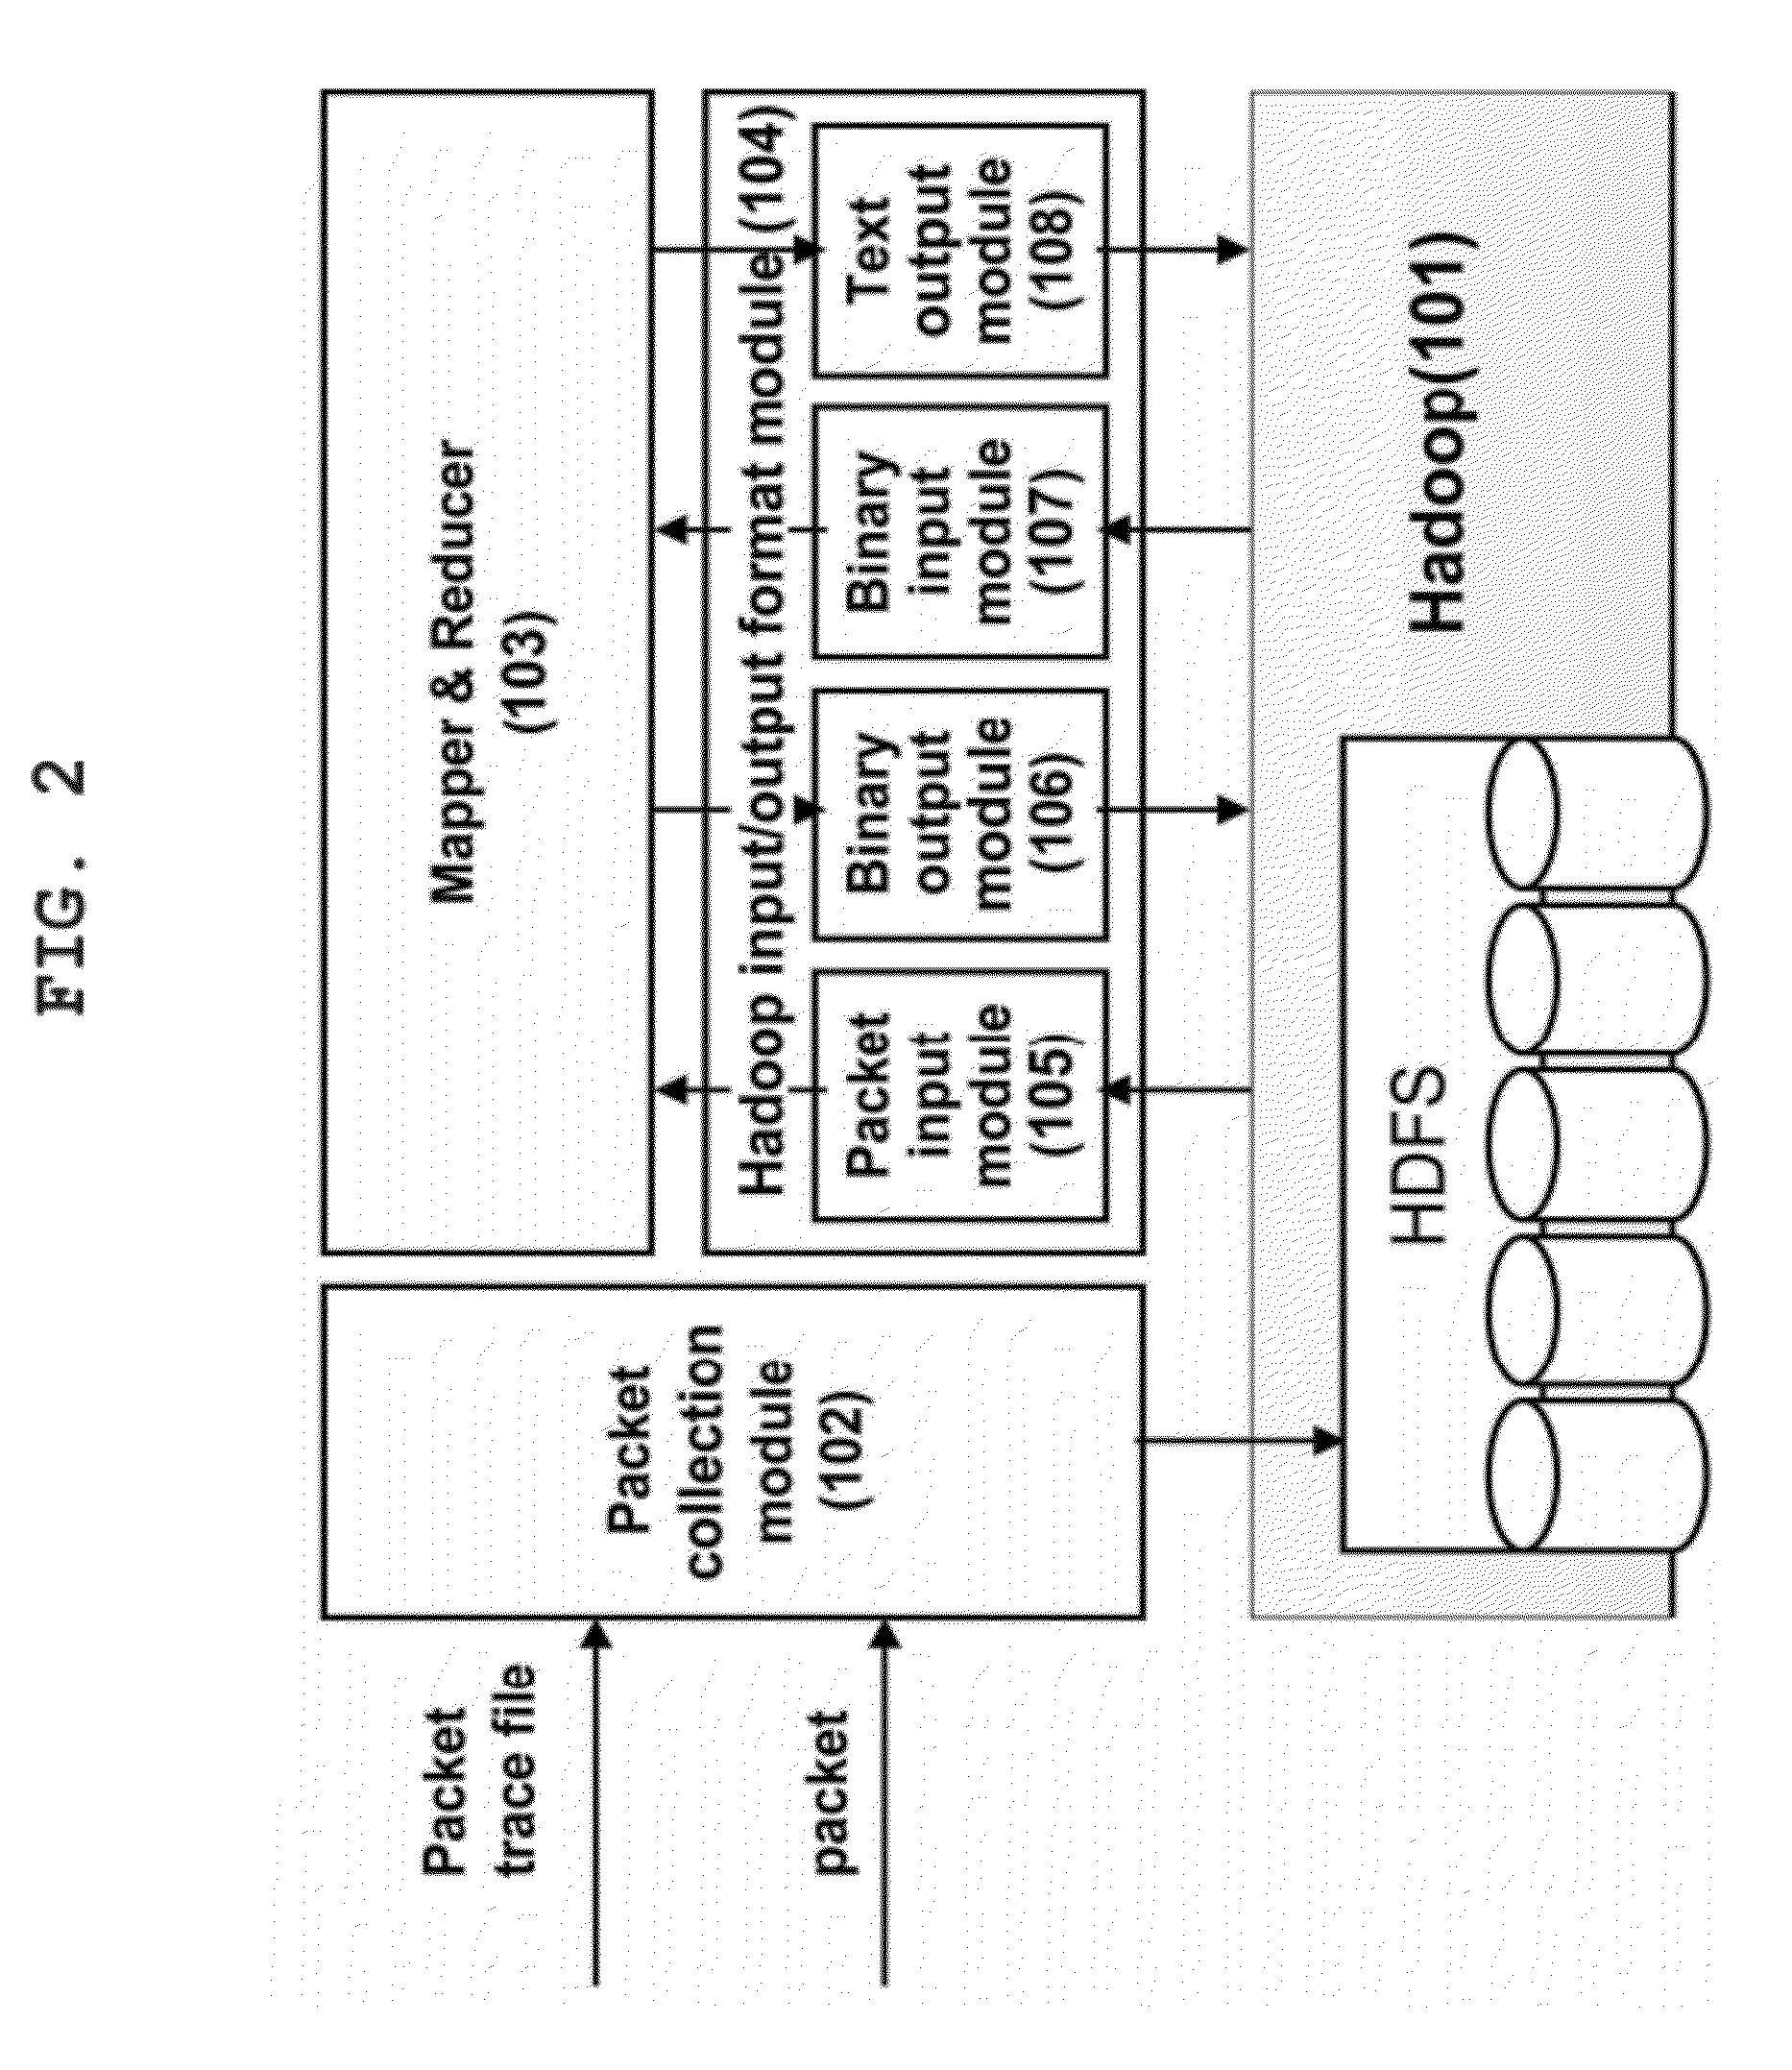 Packet analysis system and method using hadoop based parallel computation